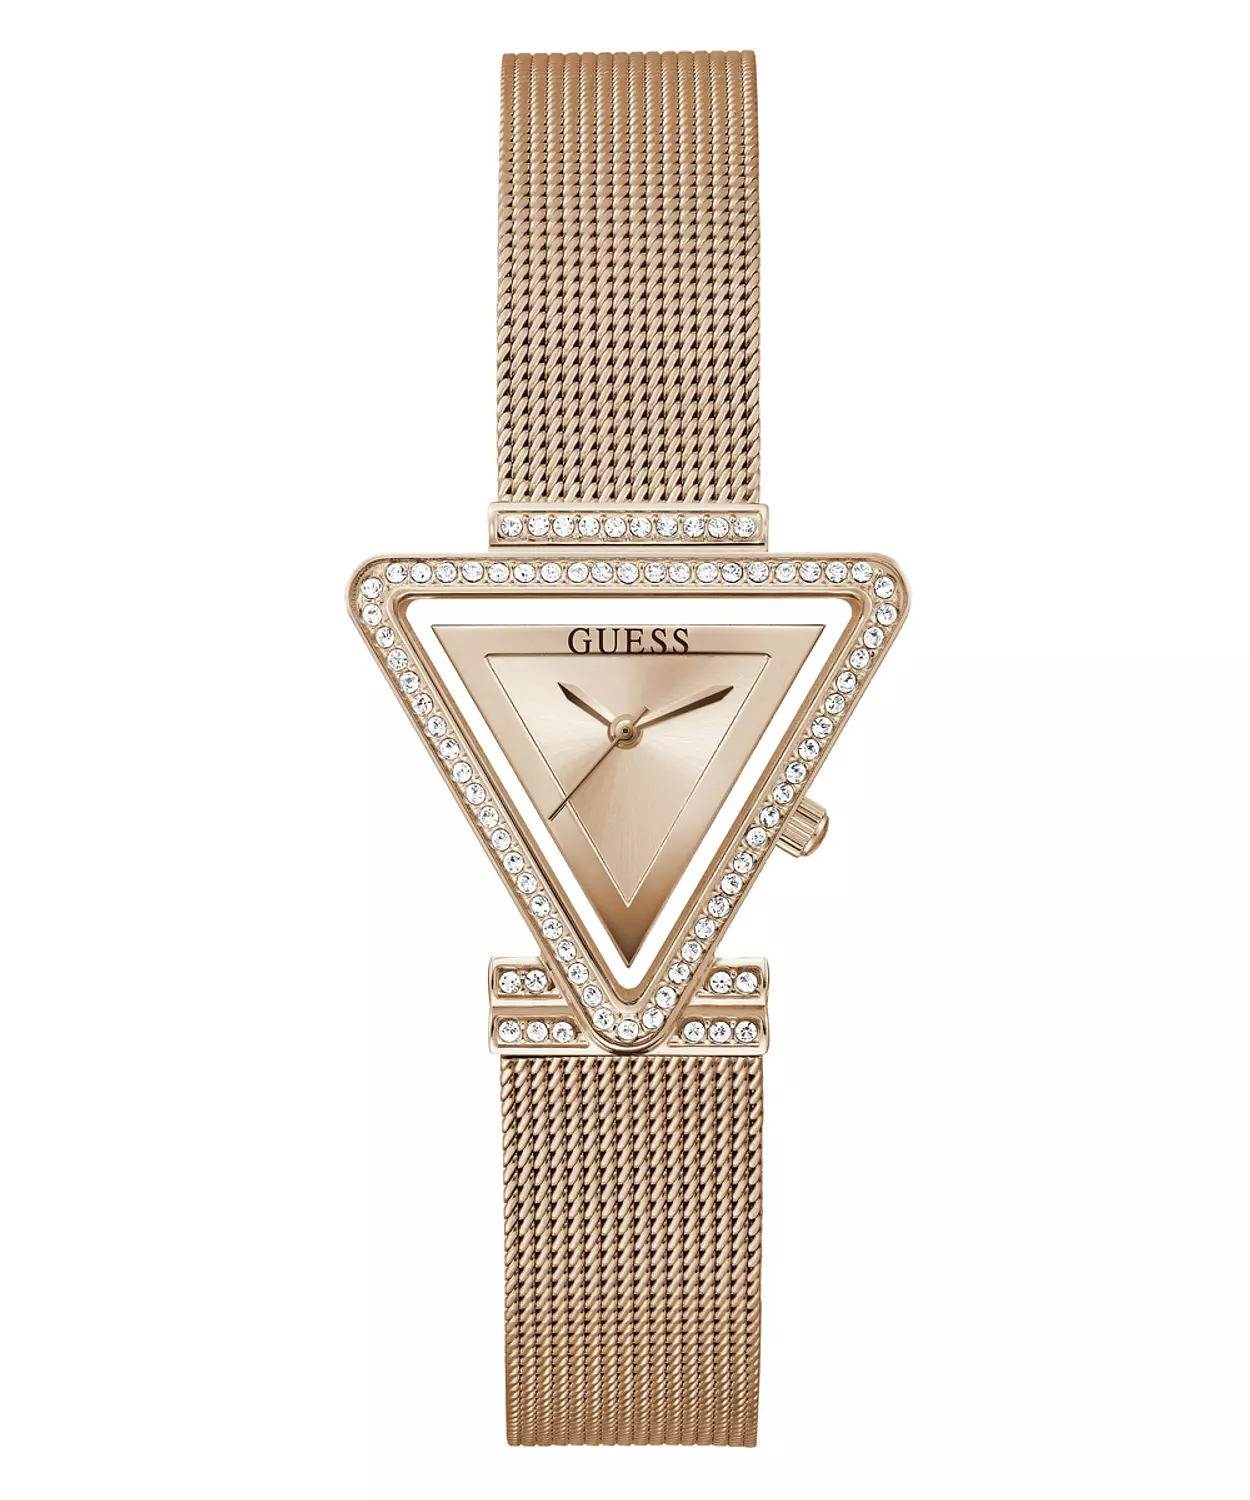 GUESS GW0508L3 ANALOG WATCH  For Women Rose Gold Stainless Steel/Mesh Polished Bracelet  hover image